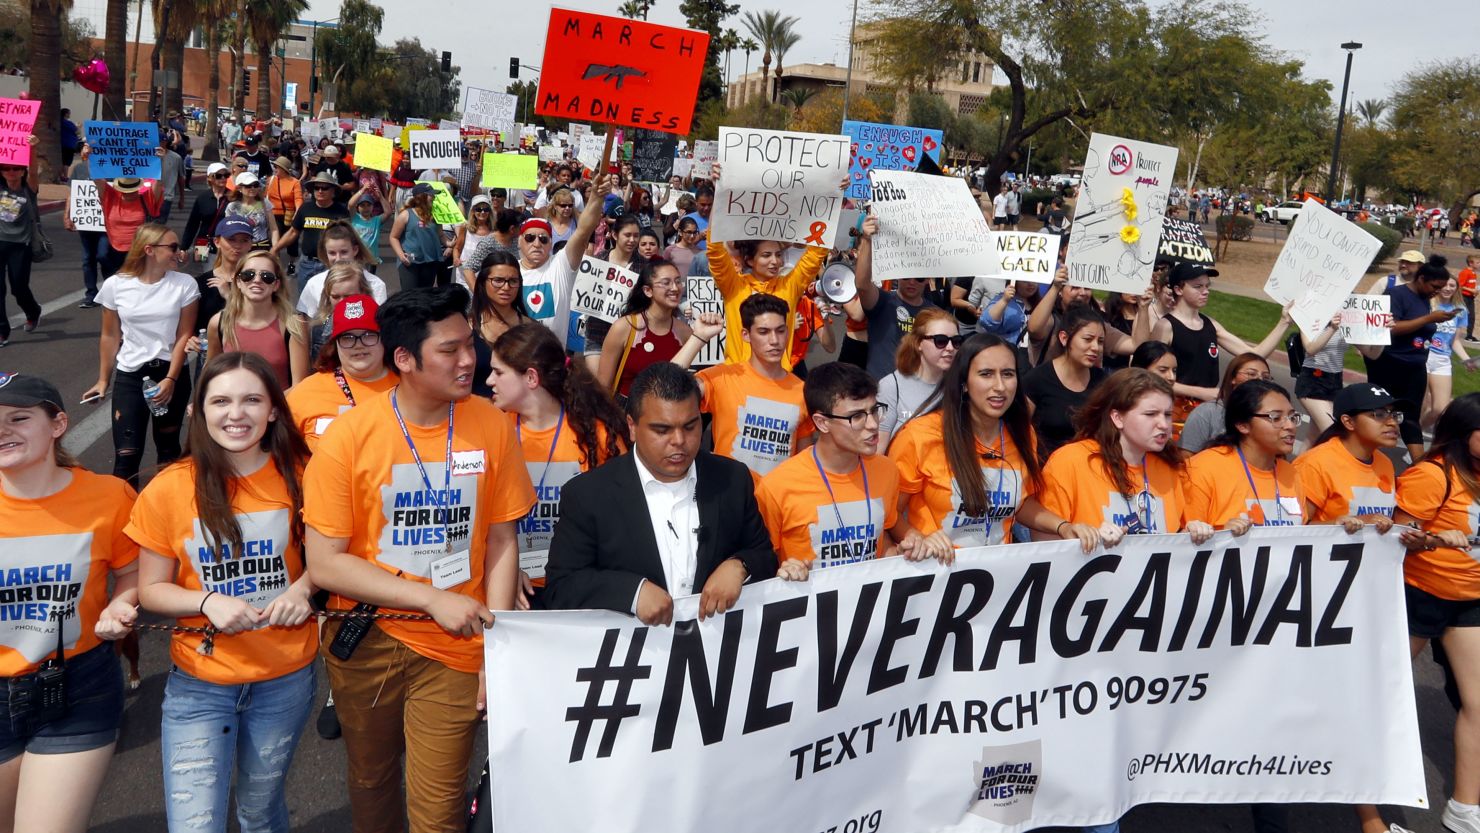 A "March For Our Lives" rally at the state Capitol in Phoenix in March 2018.